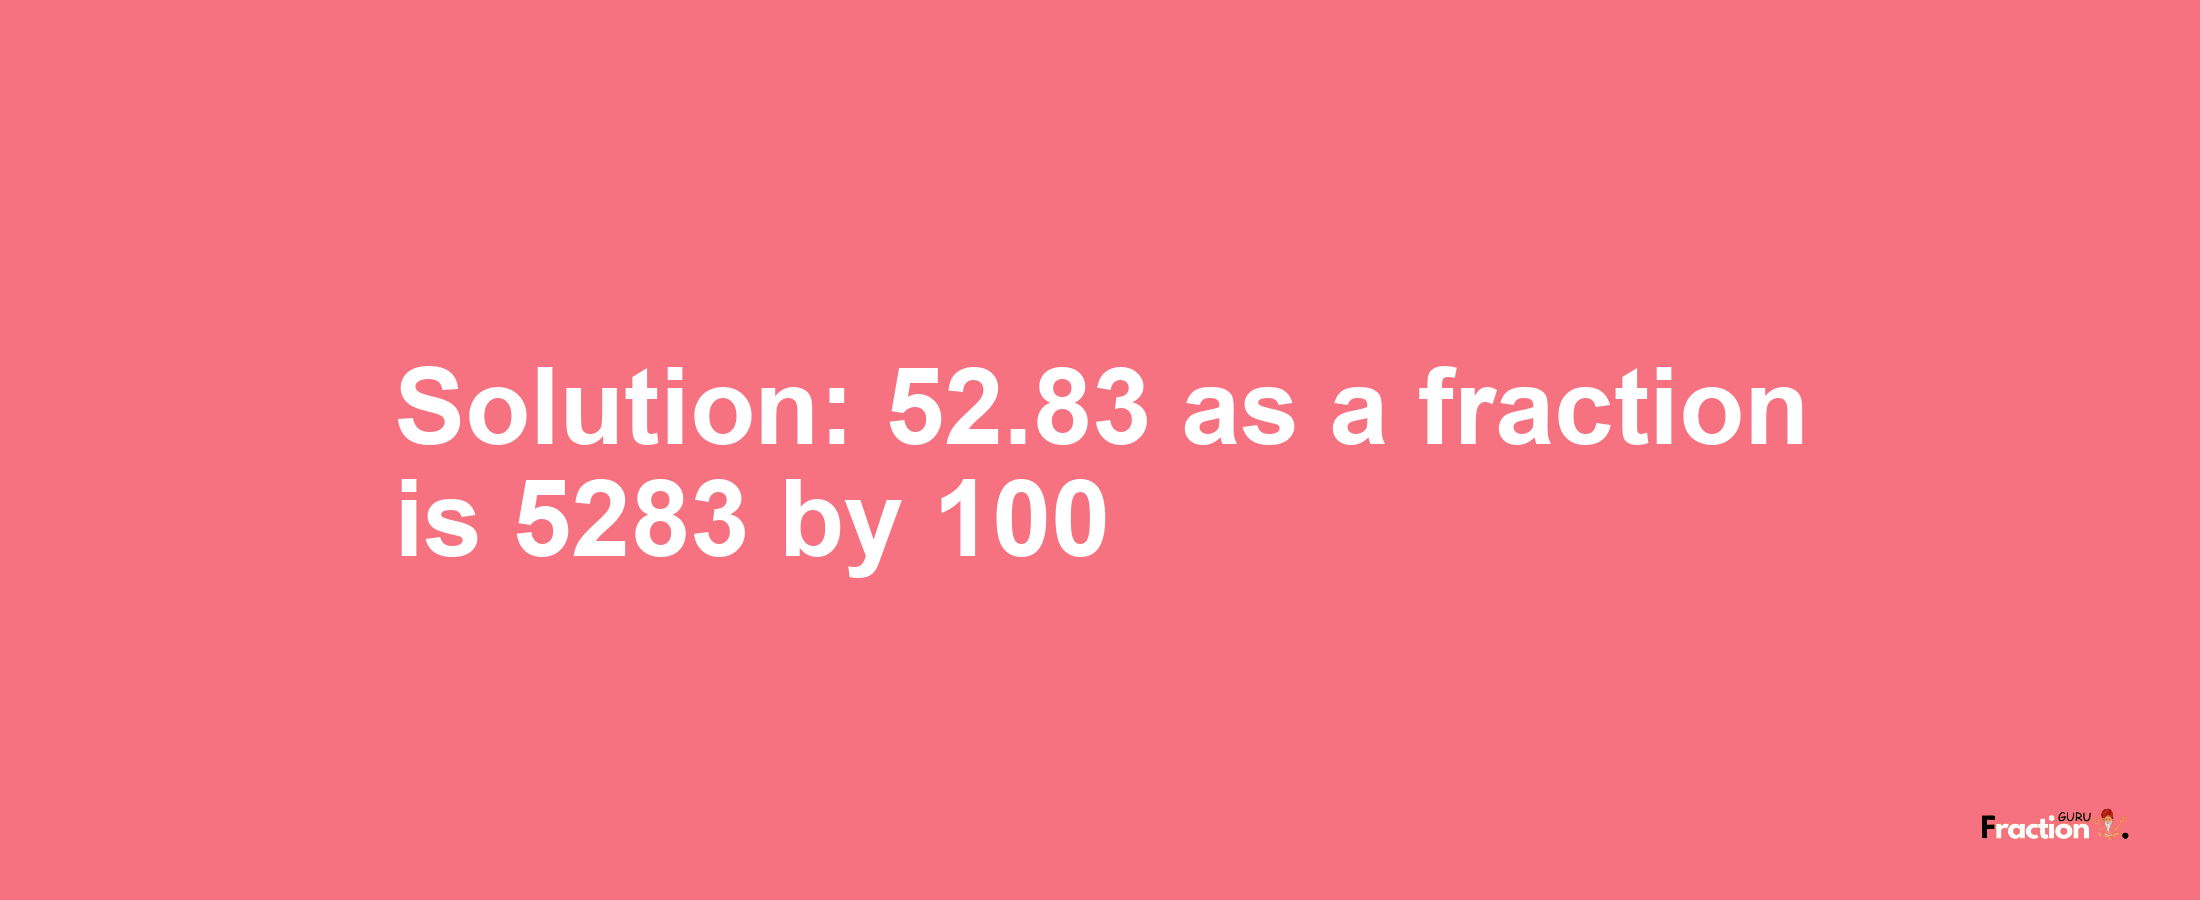 Solution:52.83 as a fraction is 5283/100